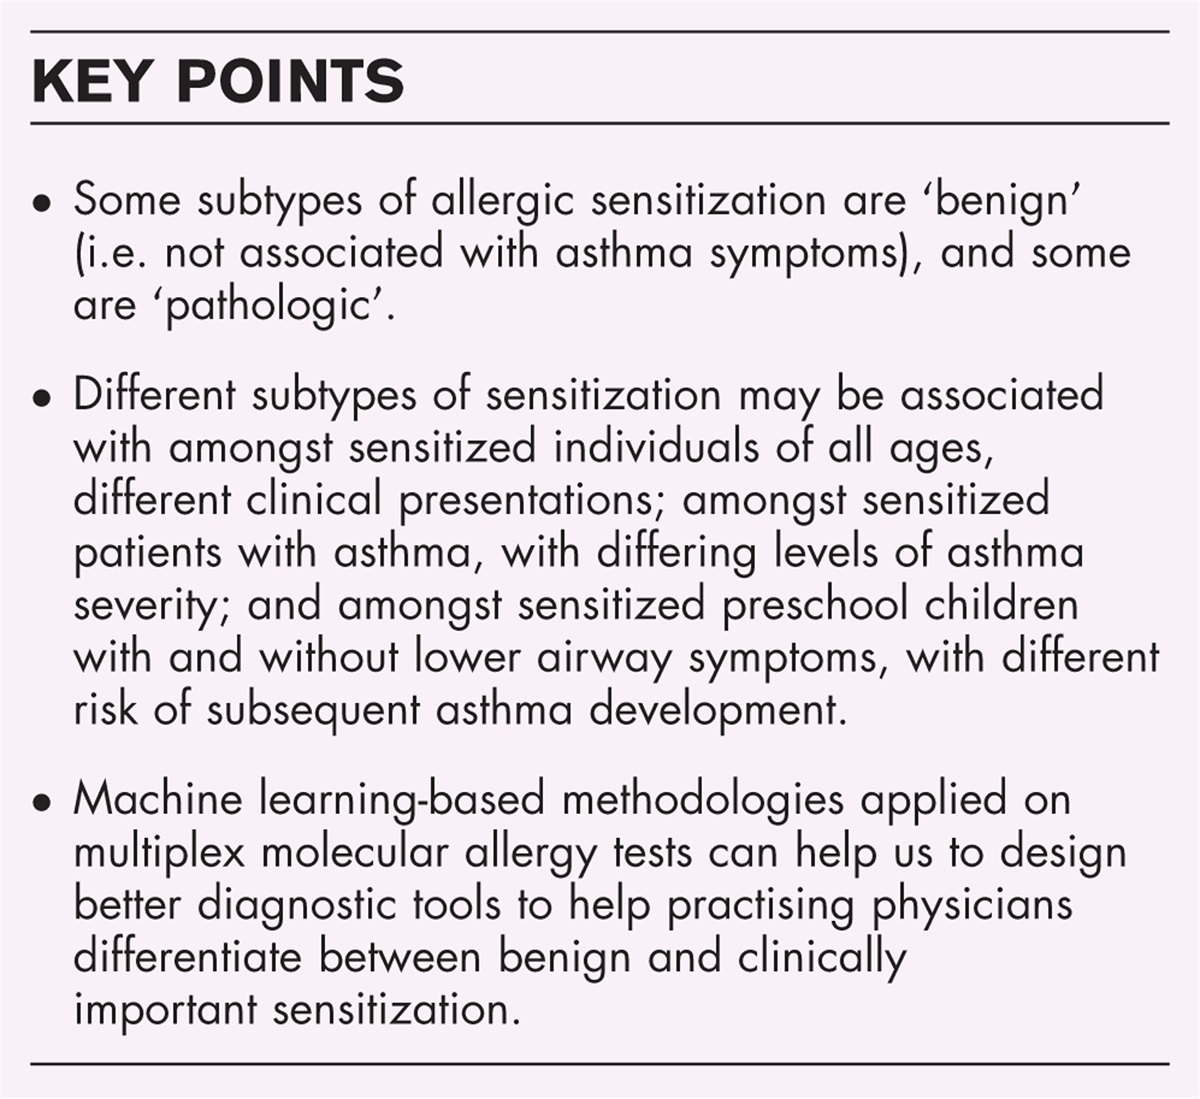 Understanding the heterogeneity of childhood allergic sensitization and its relationship with asthma